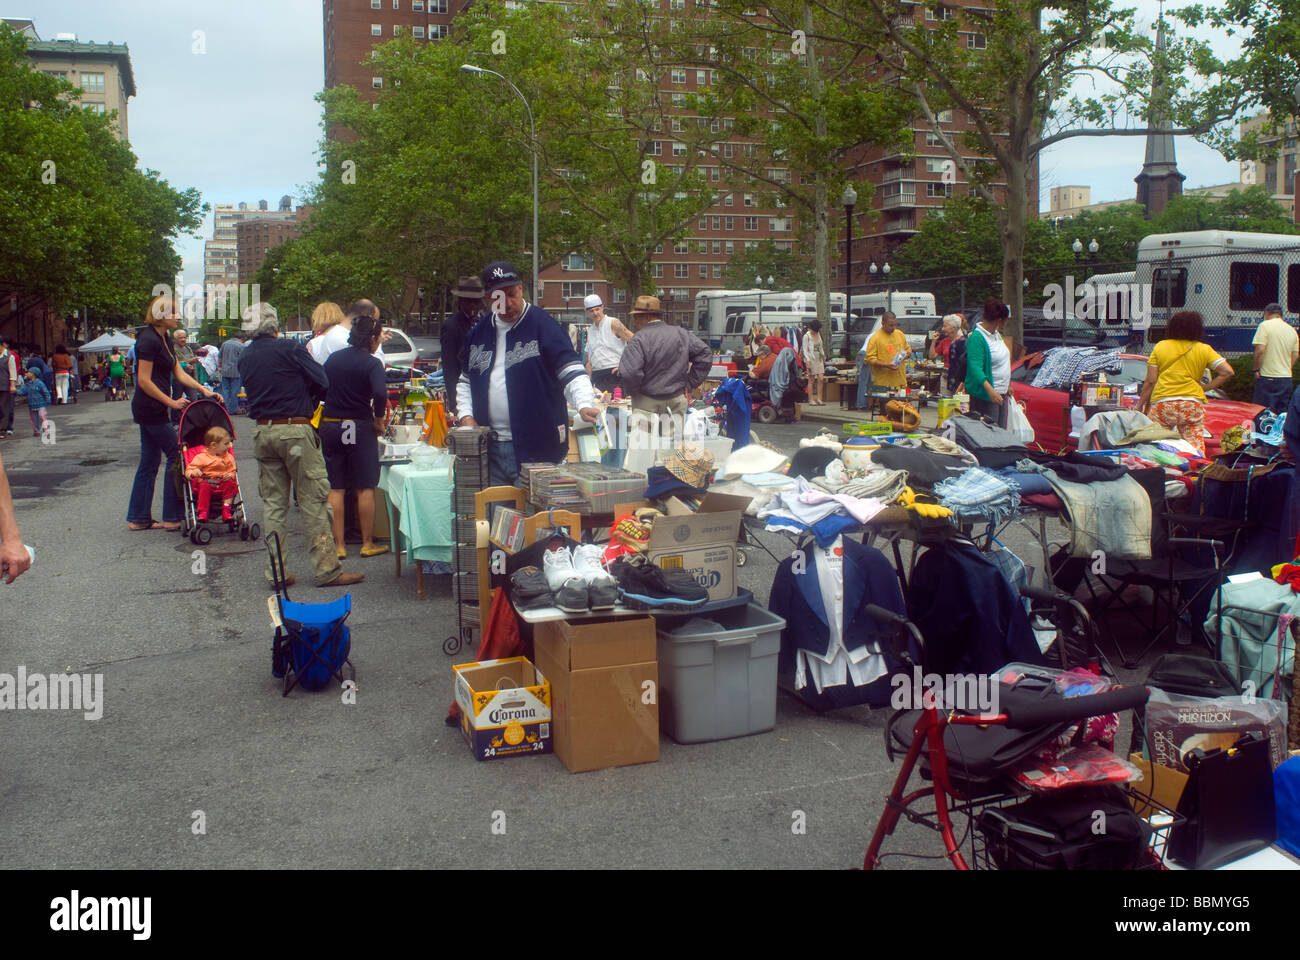 Shoppers at the Penn South Flea Market in the New York neighborhood of Chelsea Stock Photo